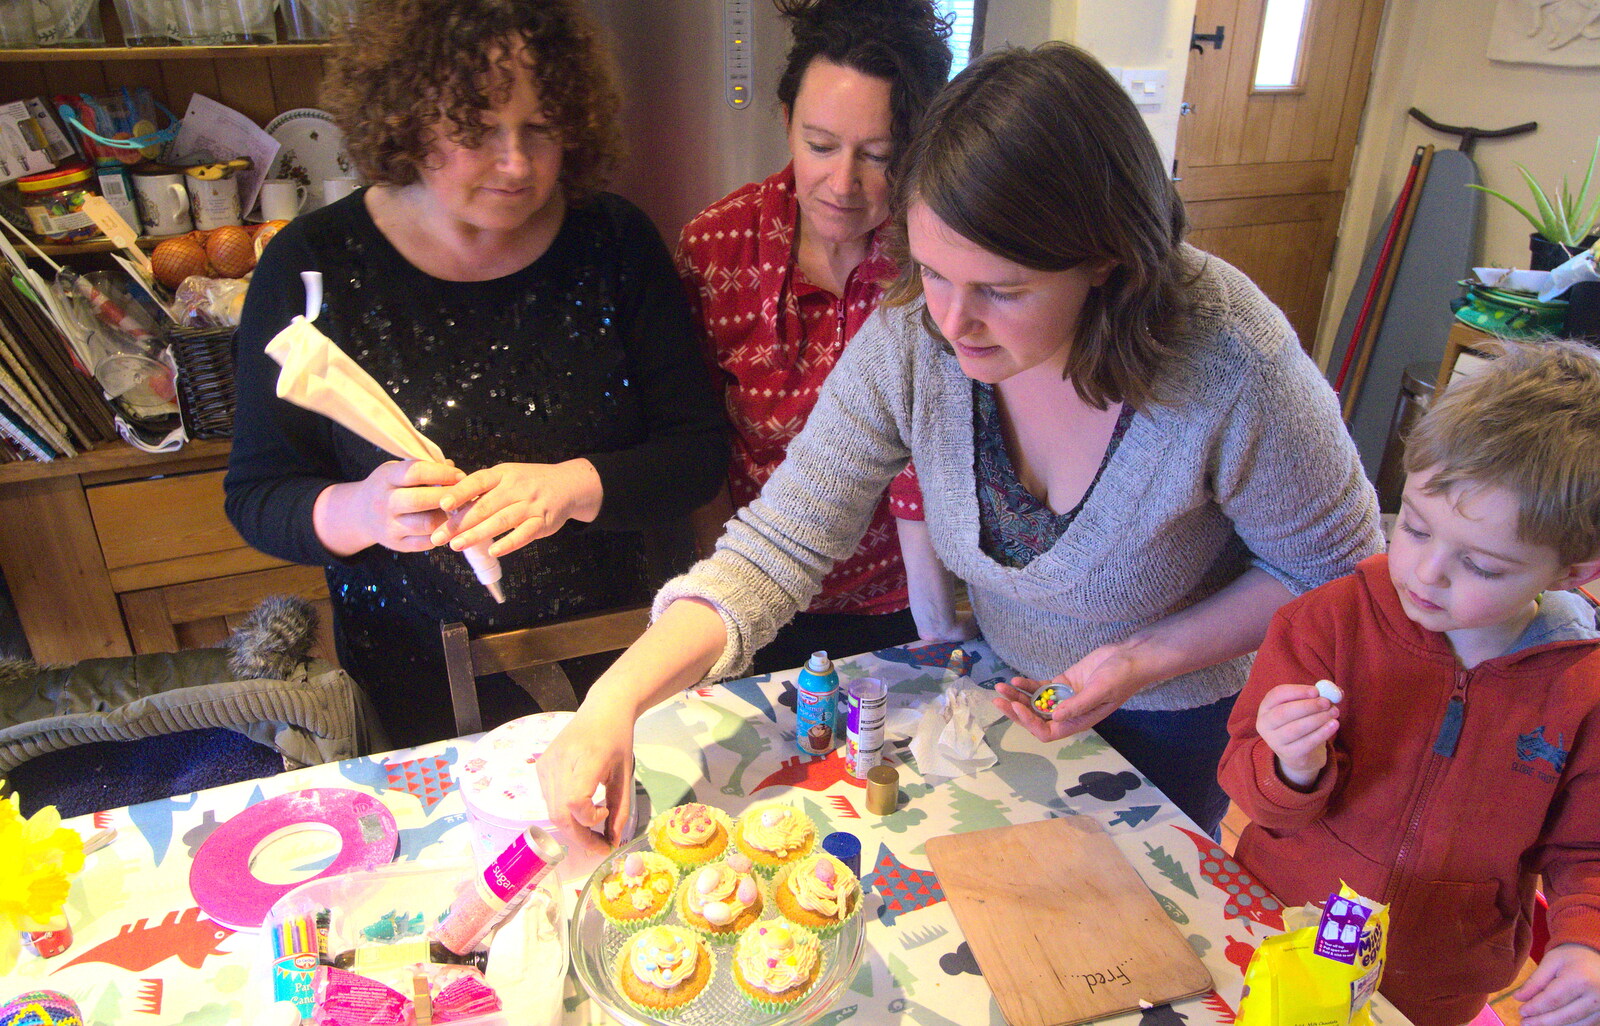 Louise is poised with an icing bag from An Easter Visit from Da Gorls, Brome, Suffolk - 2nd April 2013